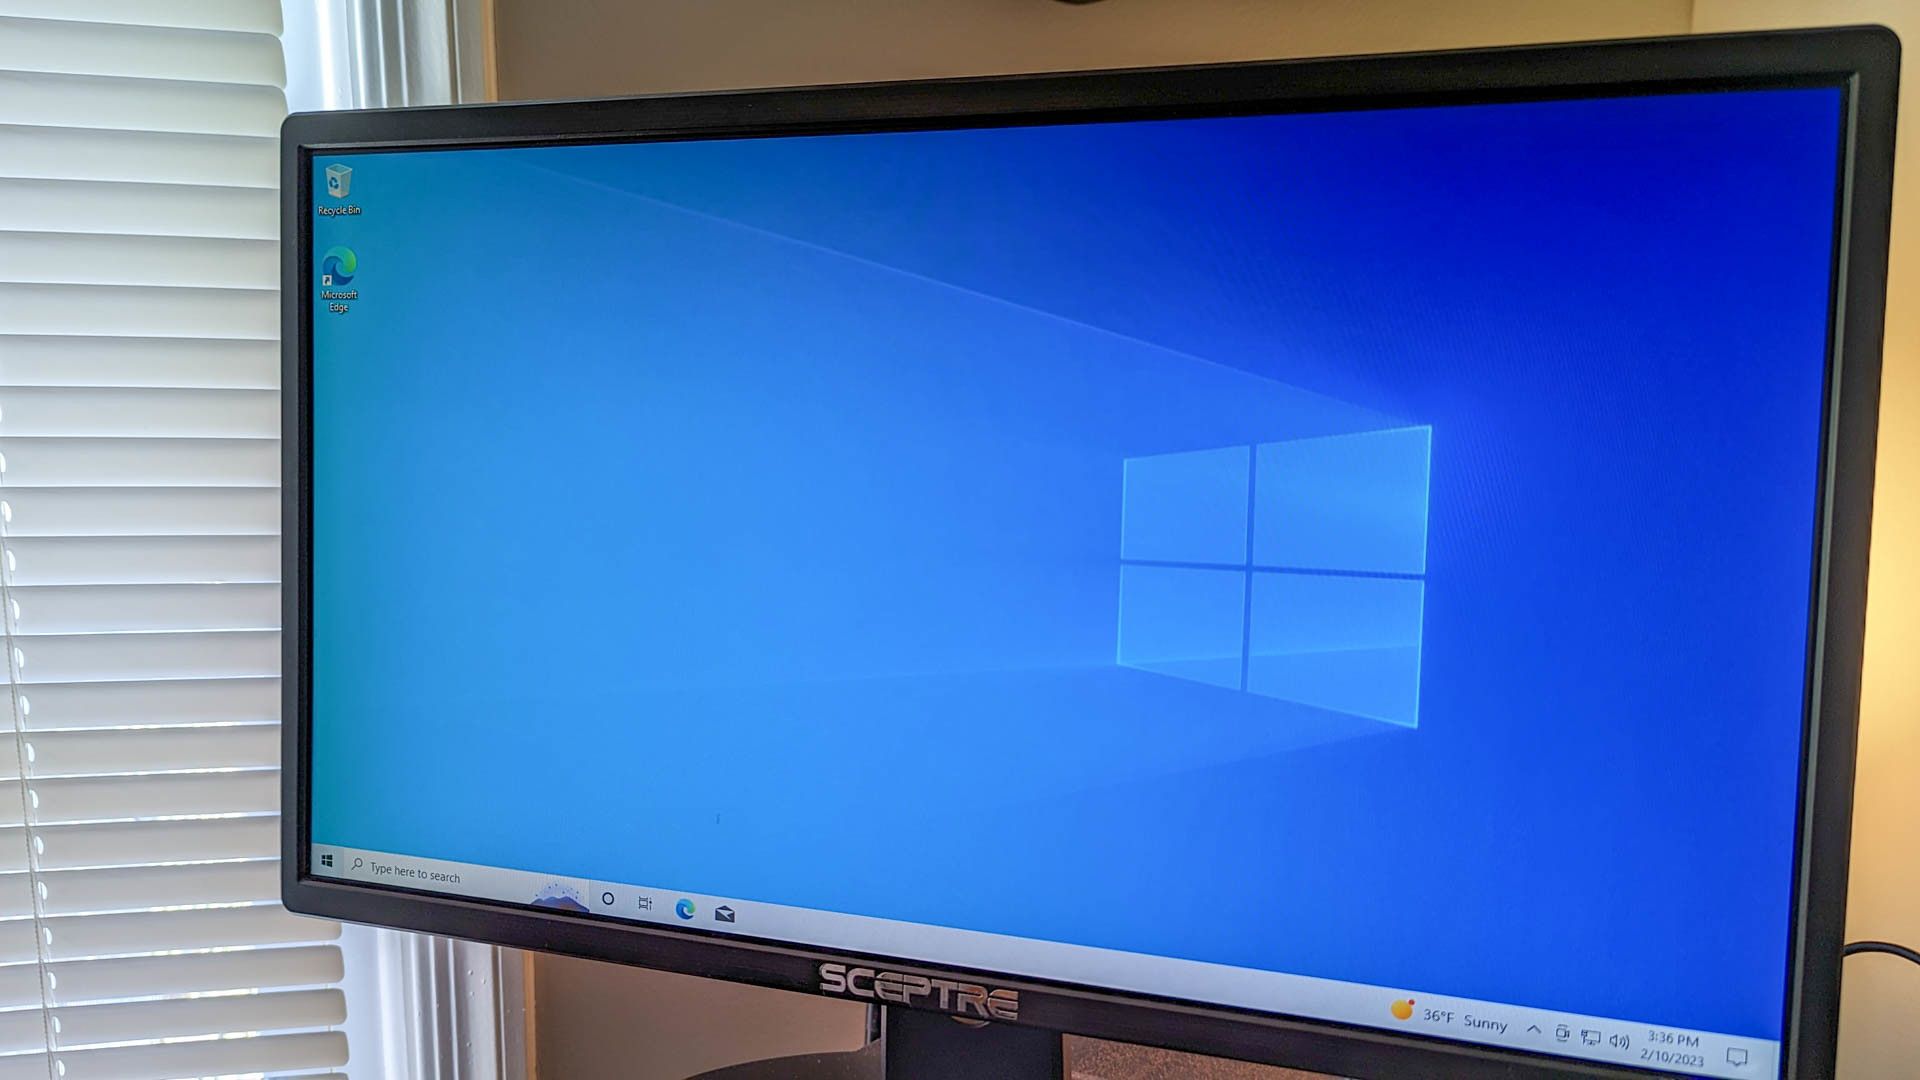 A PC monitor showing a Windows 10 desktop with icons.